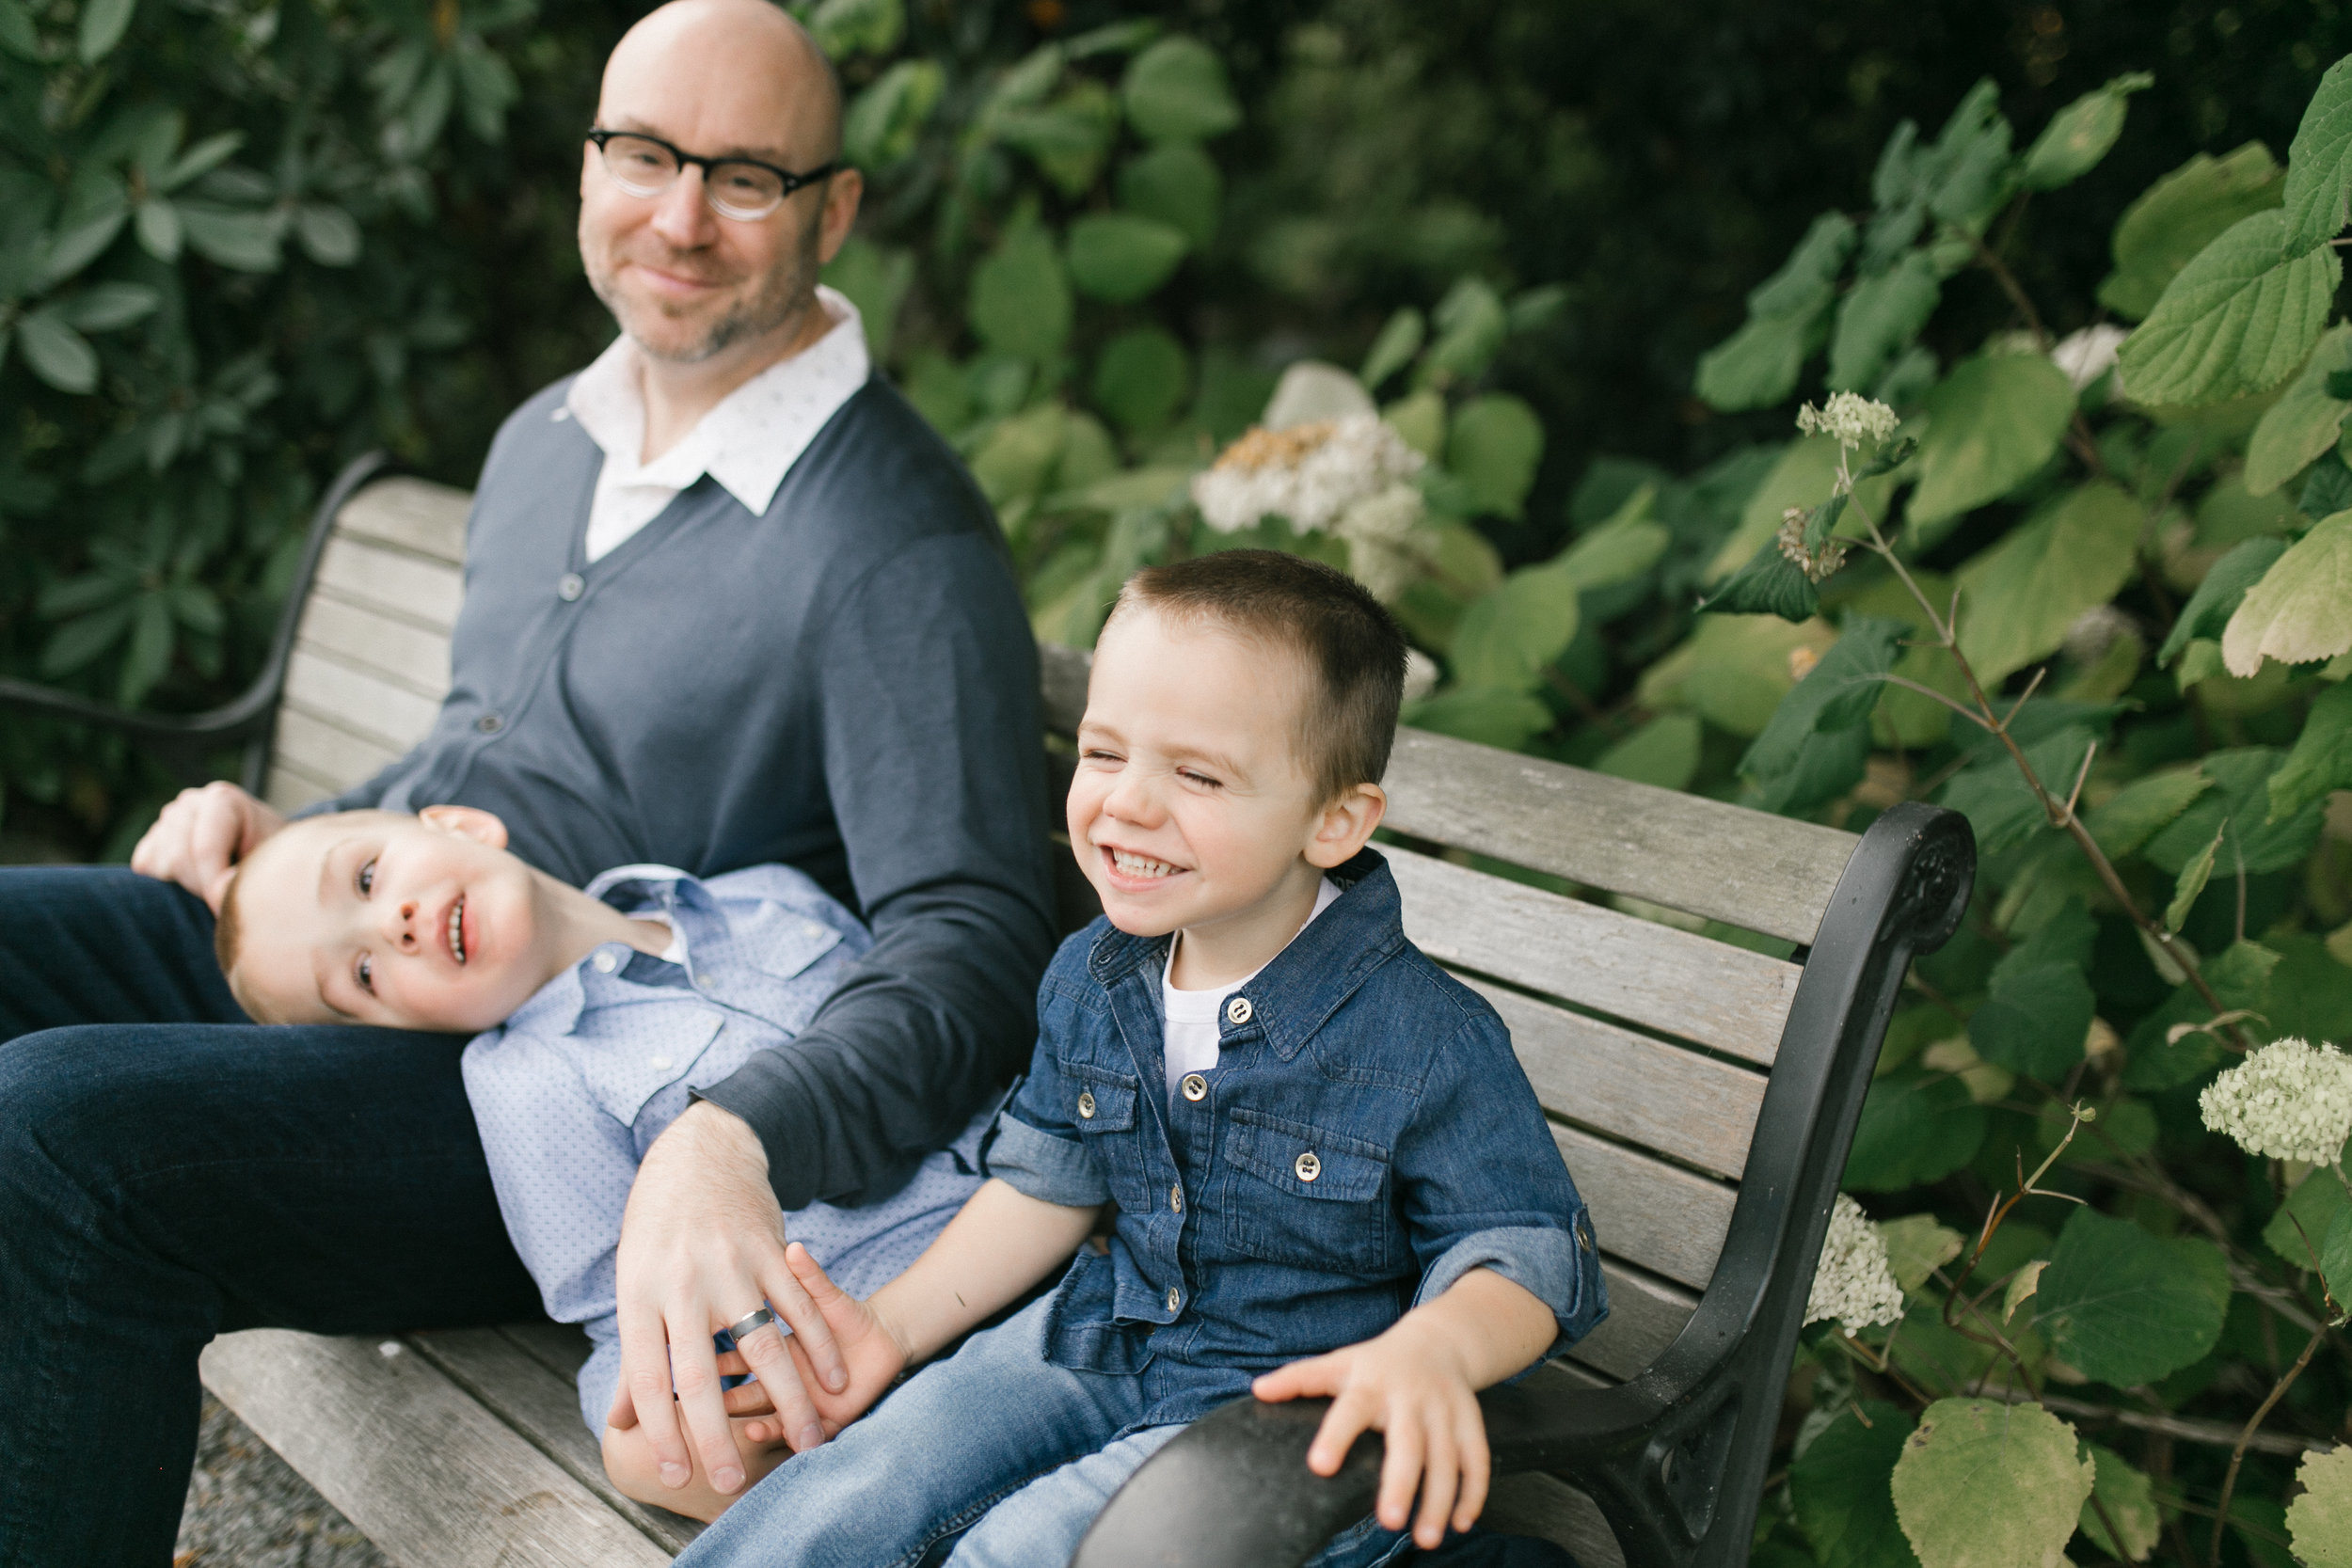 Family photos at Bellevue Botanical Garden, natural light with toddlers | Chelsea Macor Photography-20.jpg